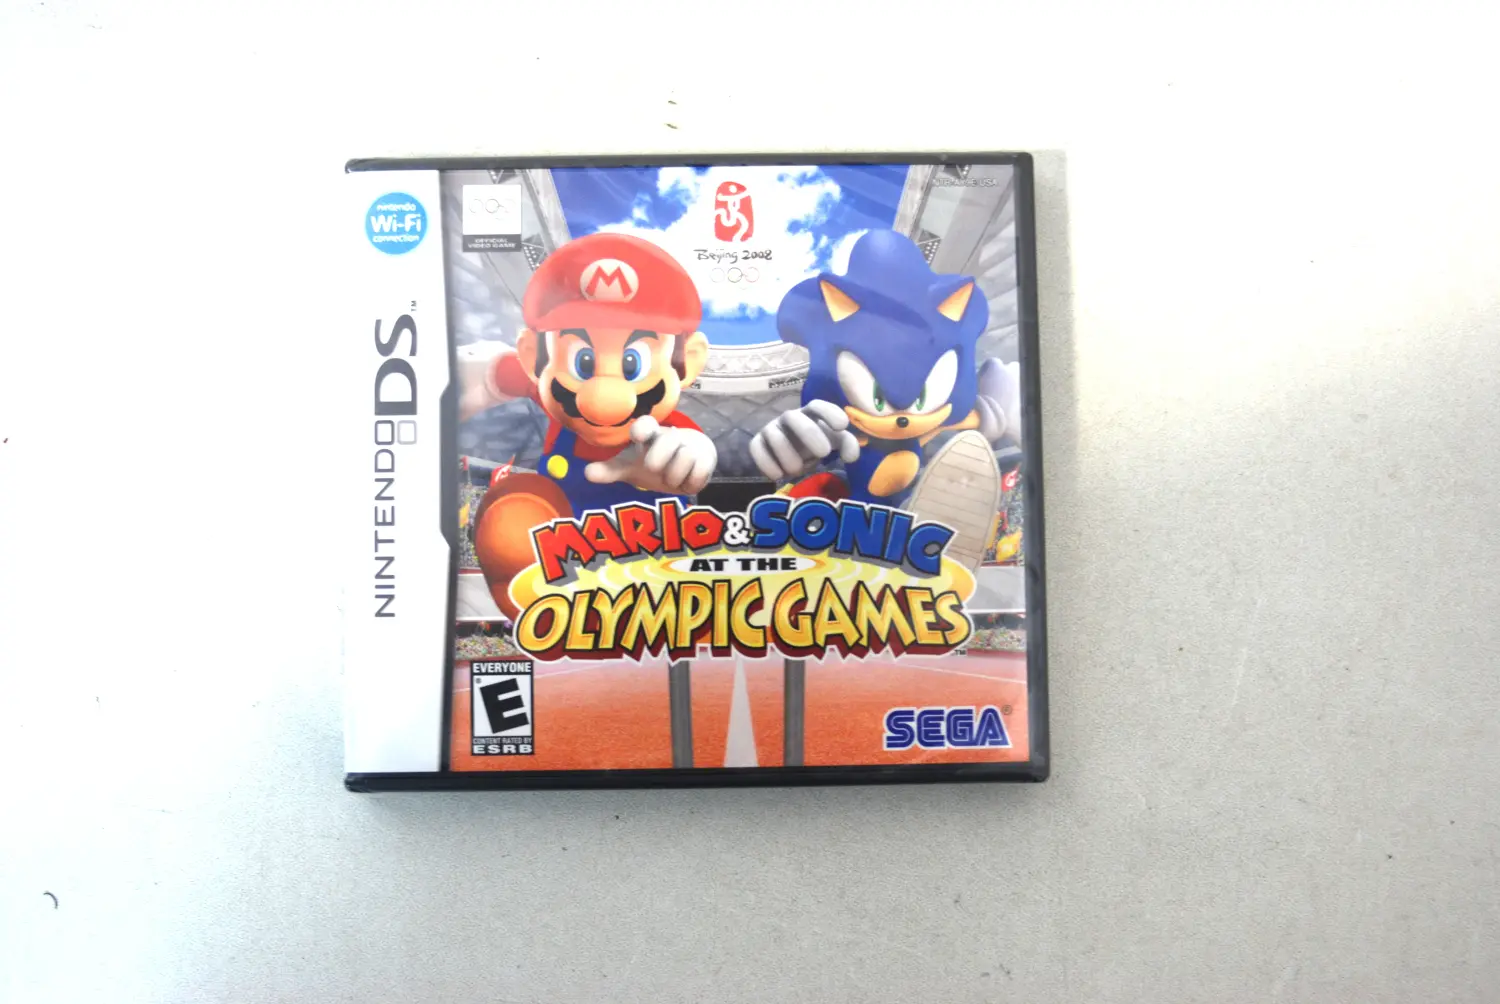 jeu DS mario & sonic AT THE OLYMPIC GAMES - version anglais